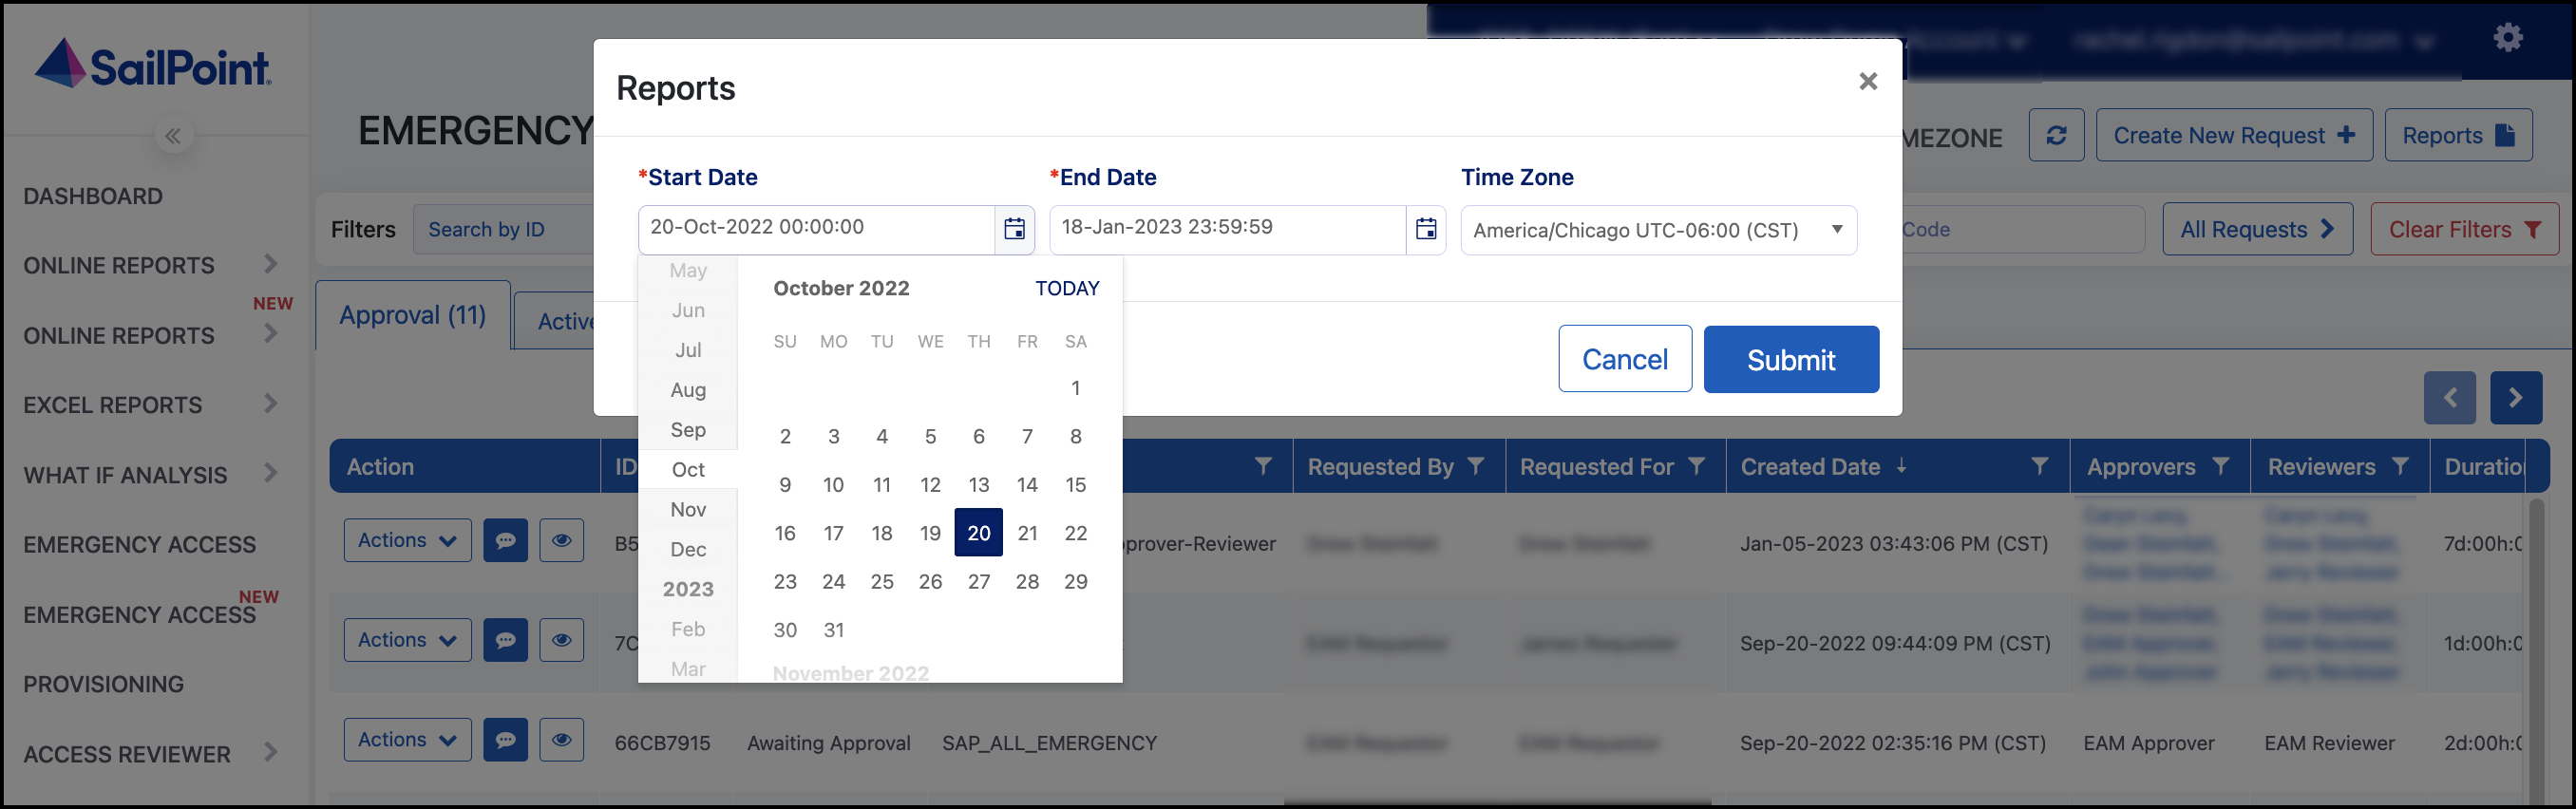 Calendar with the dates selected for the timeframe to generate reports.